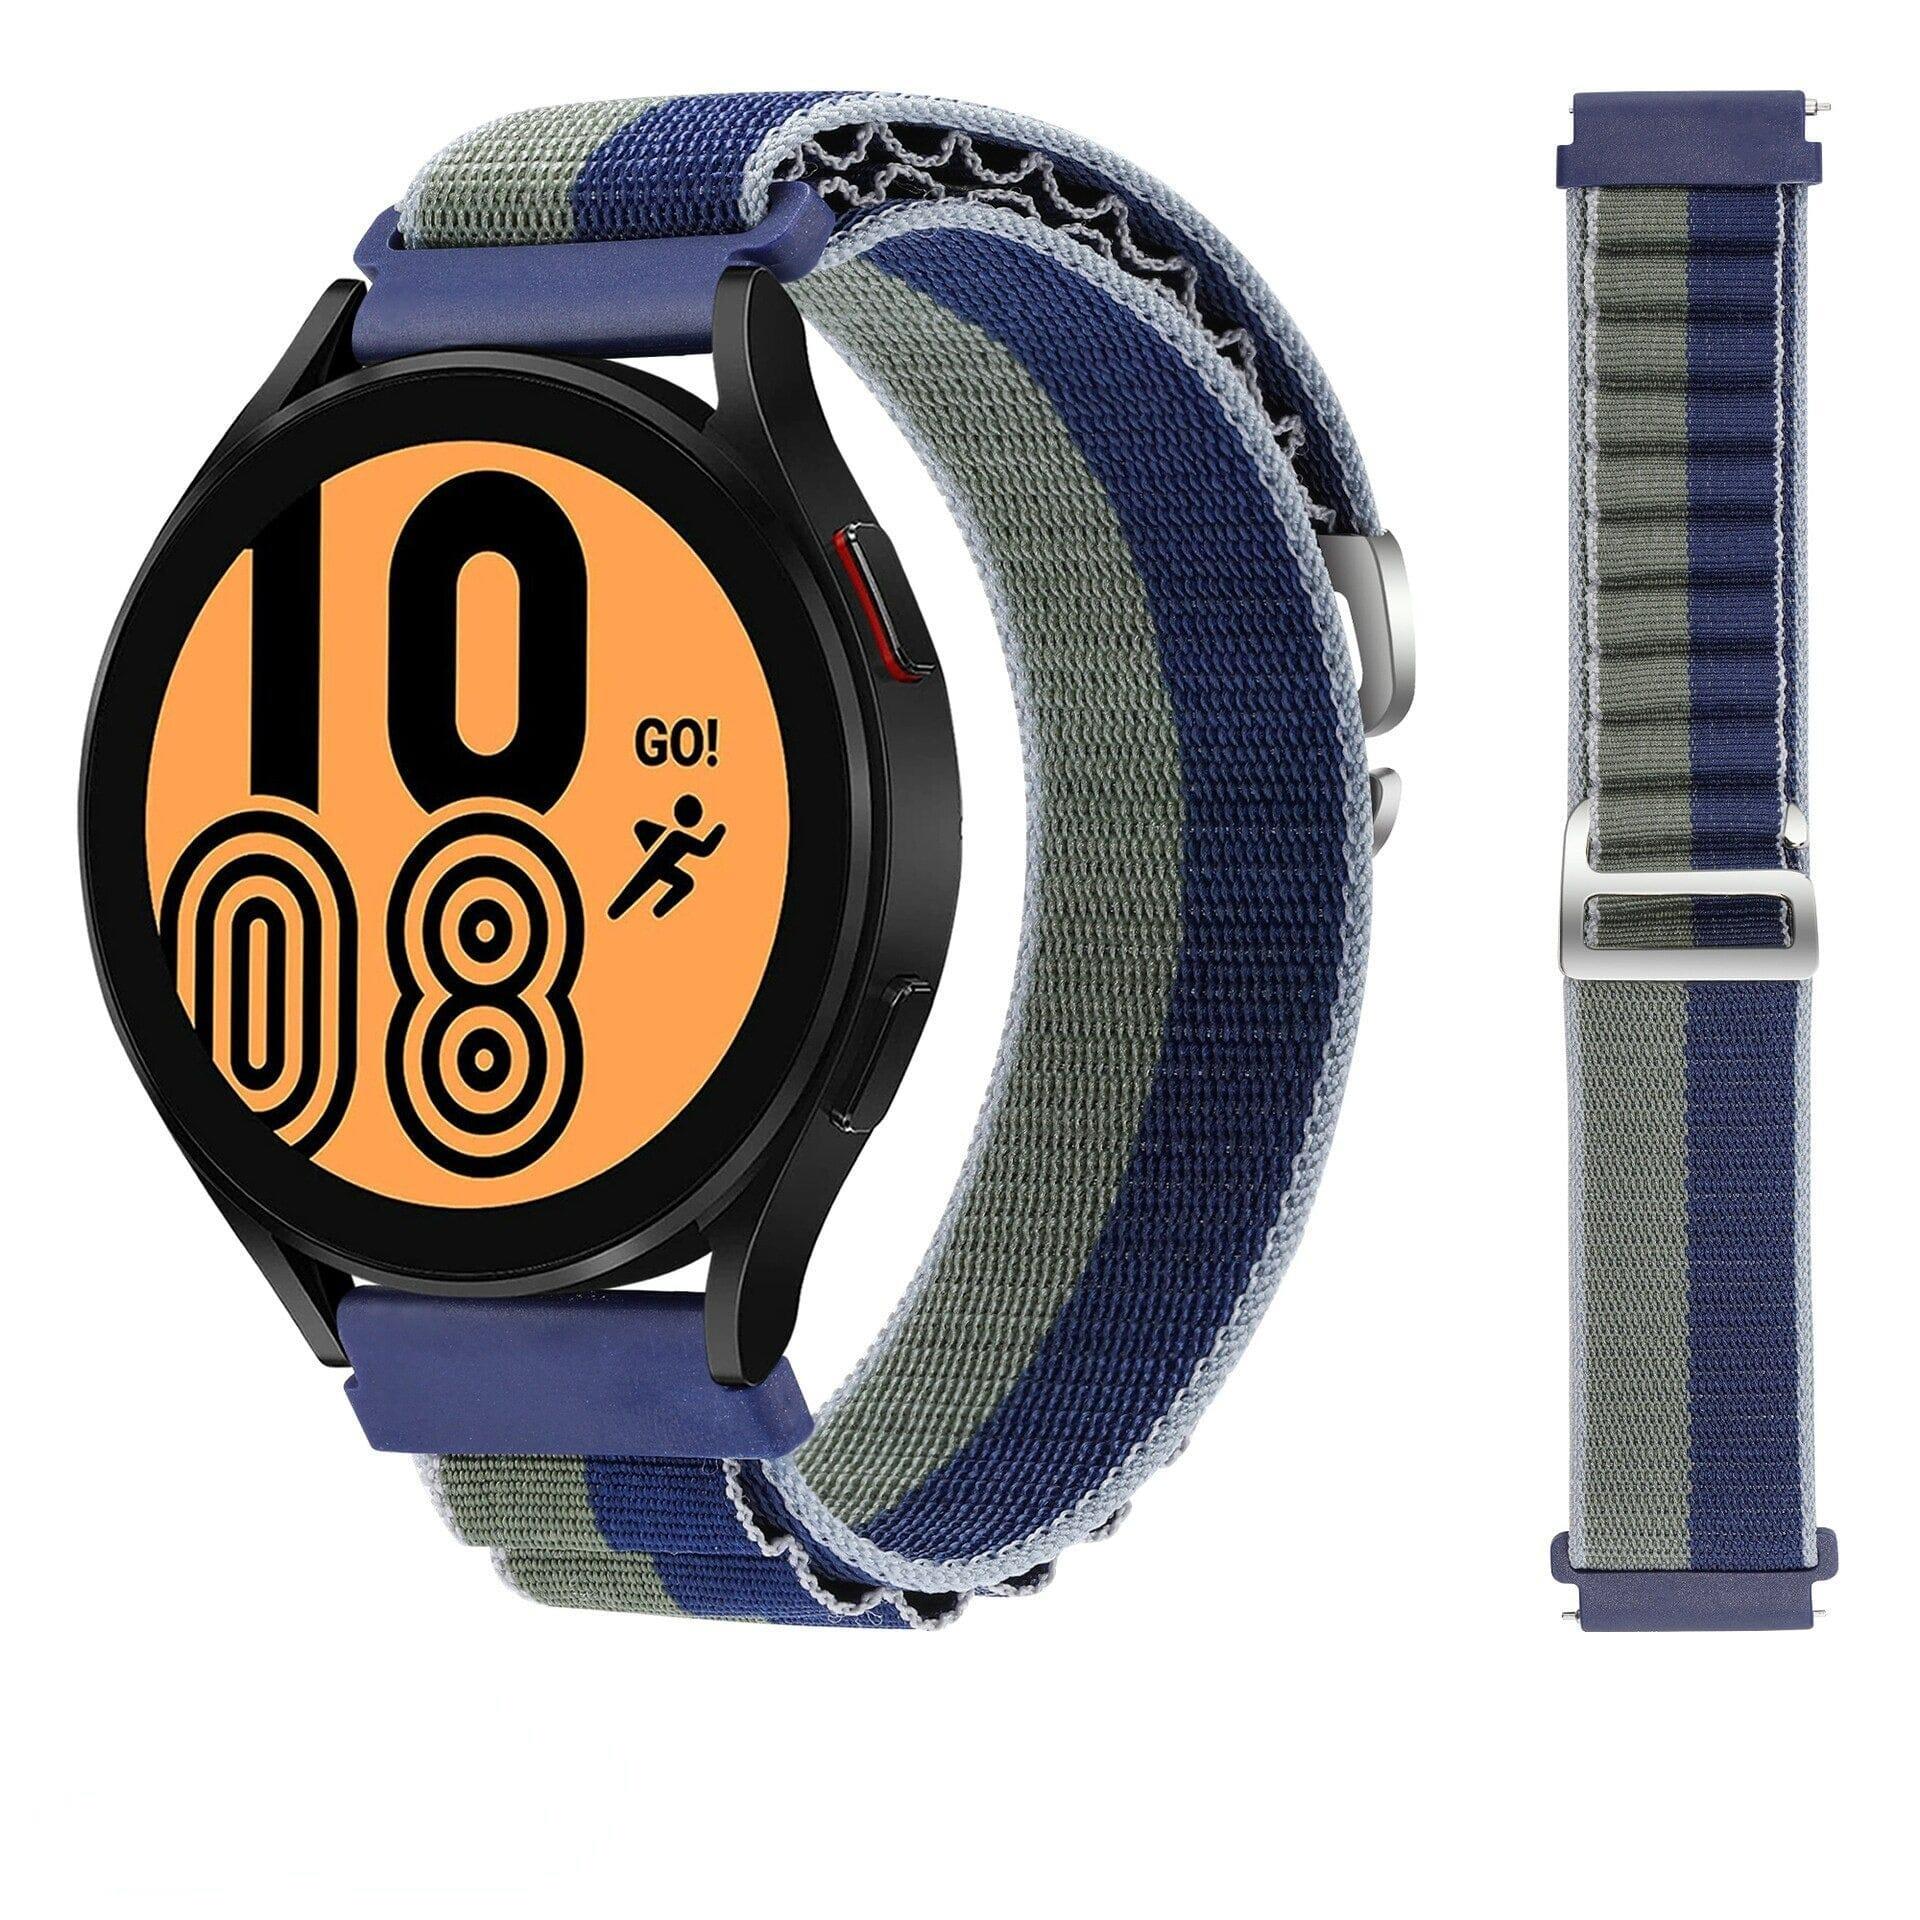 Alpine Loop Watch Straps Compatible with the Google Pixel Watch